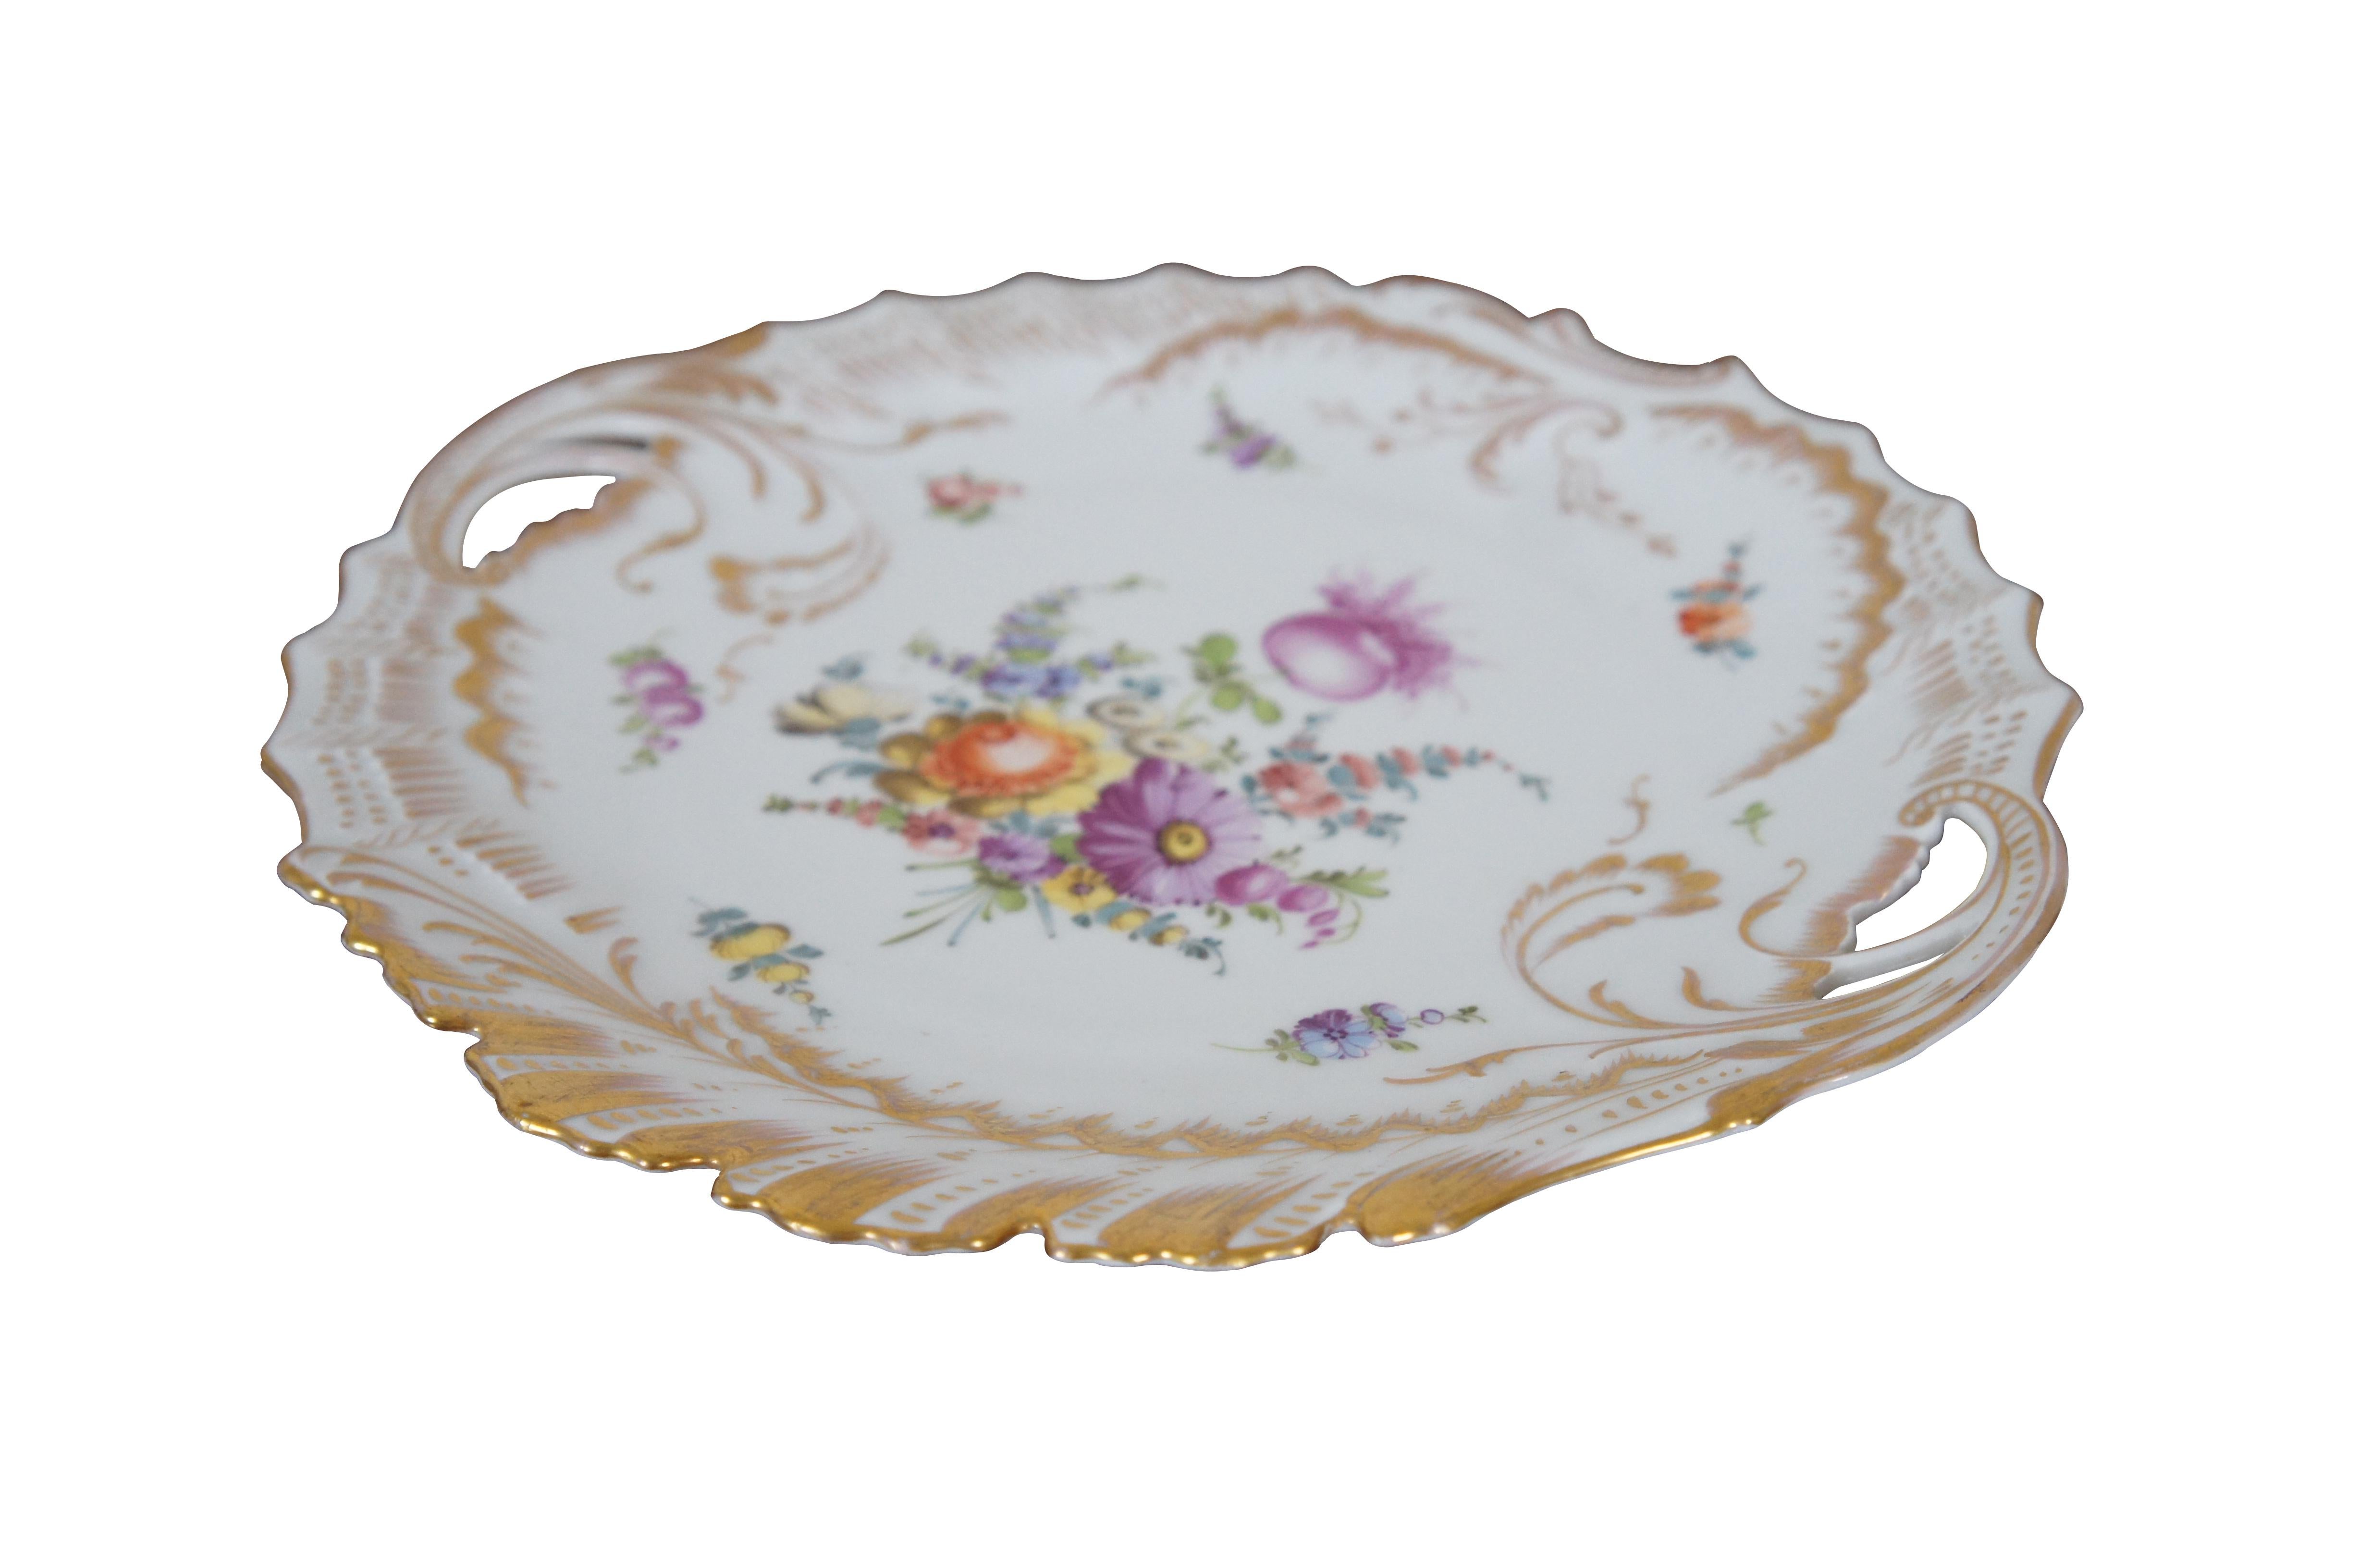 Antique Franziska Hirsch cake plate or platter featuring floral motif with handles and scalloped gold rim.

